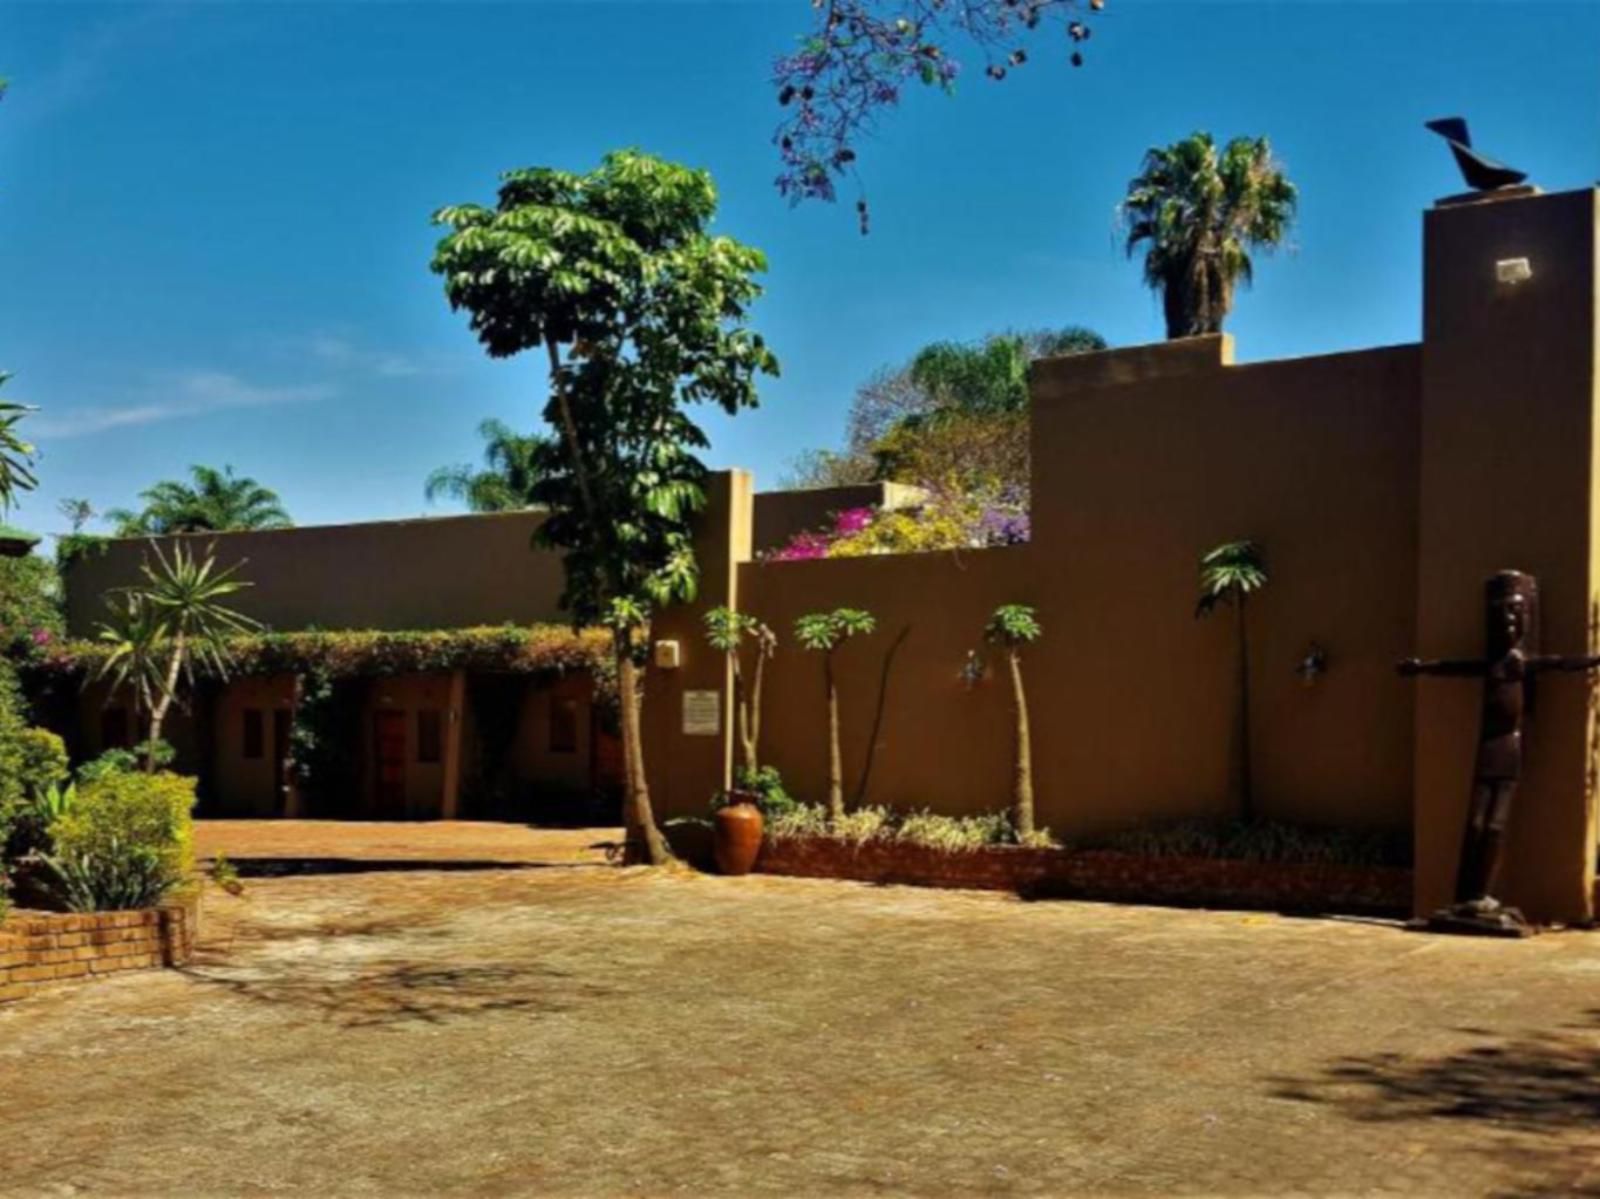 African Roots Guest House And Conference Venue Polokwane Ext 4 Polokwane Pietersburg Limpopo Province South Africa Complementary Colors, House, Building, Architecture, Palm Tree, Plant, Nature, Wood